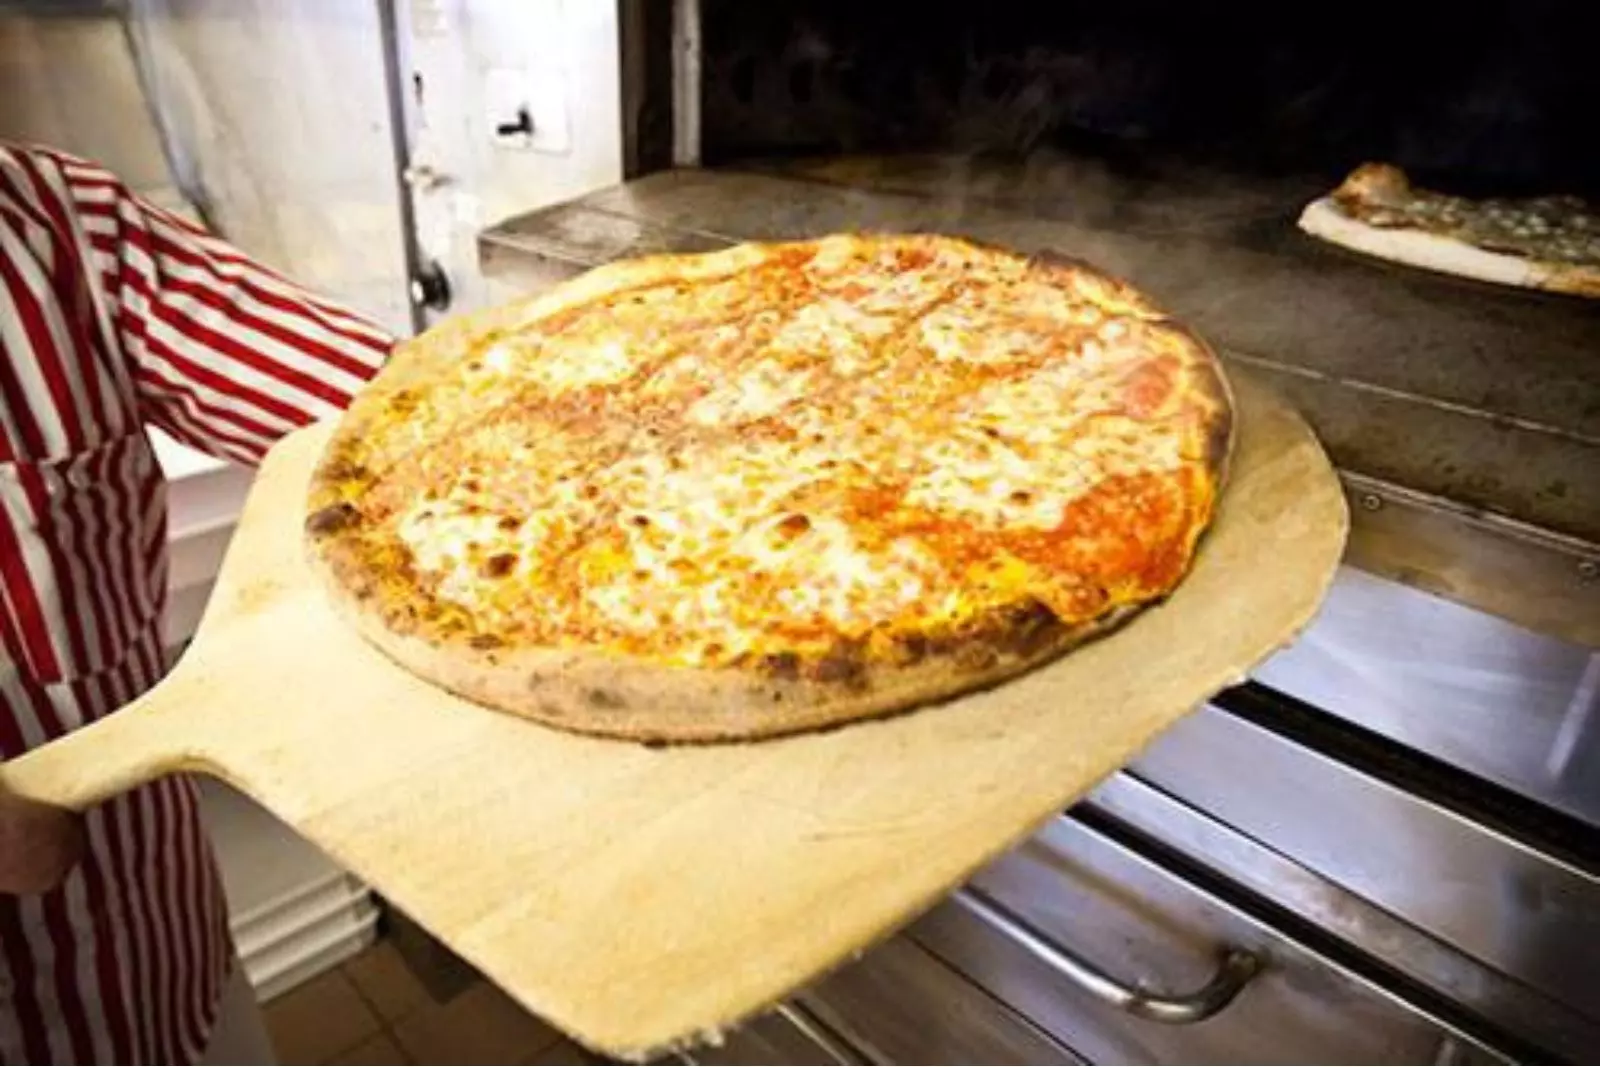 This NJ pizzeria is changing ownership after 60 years